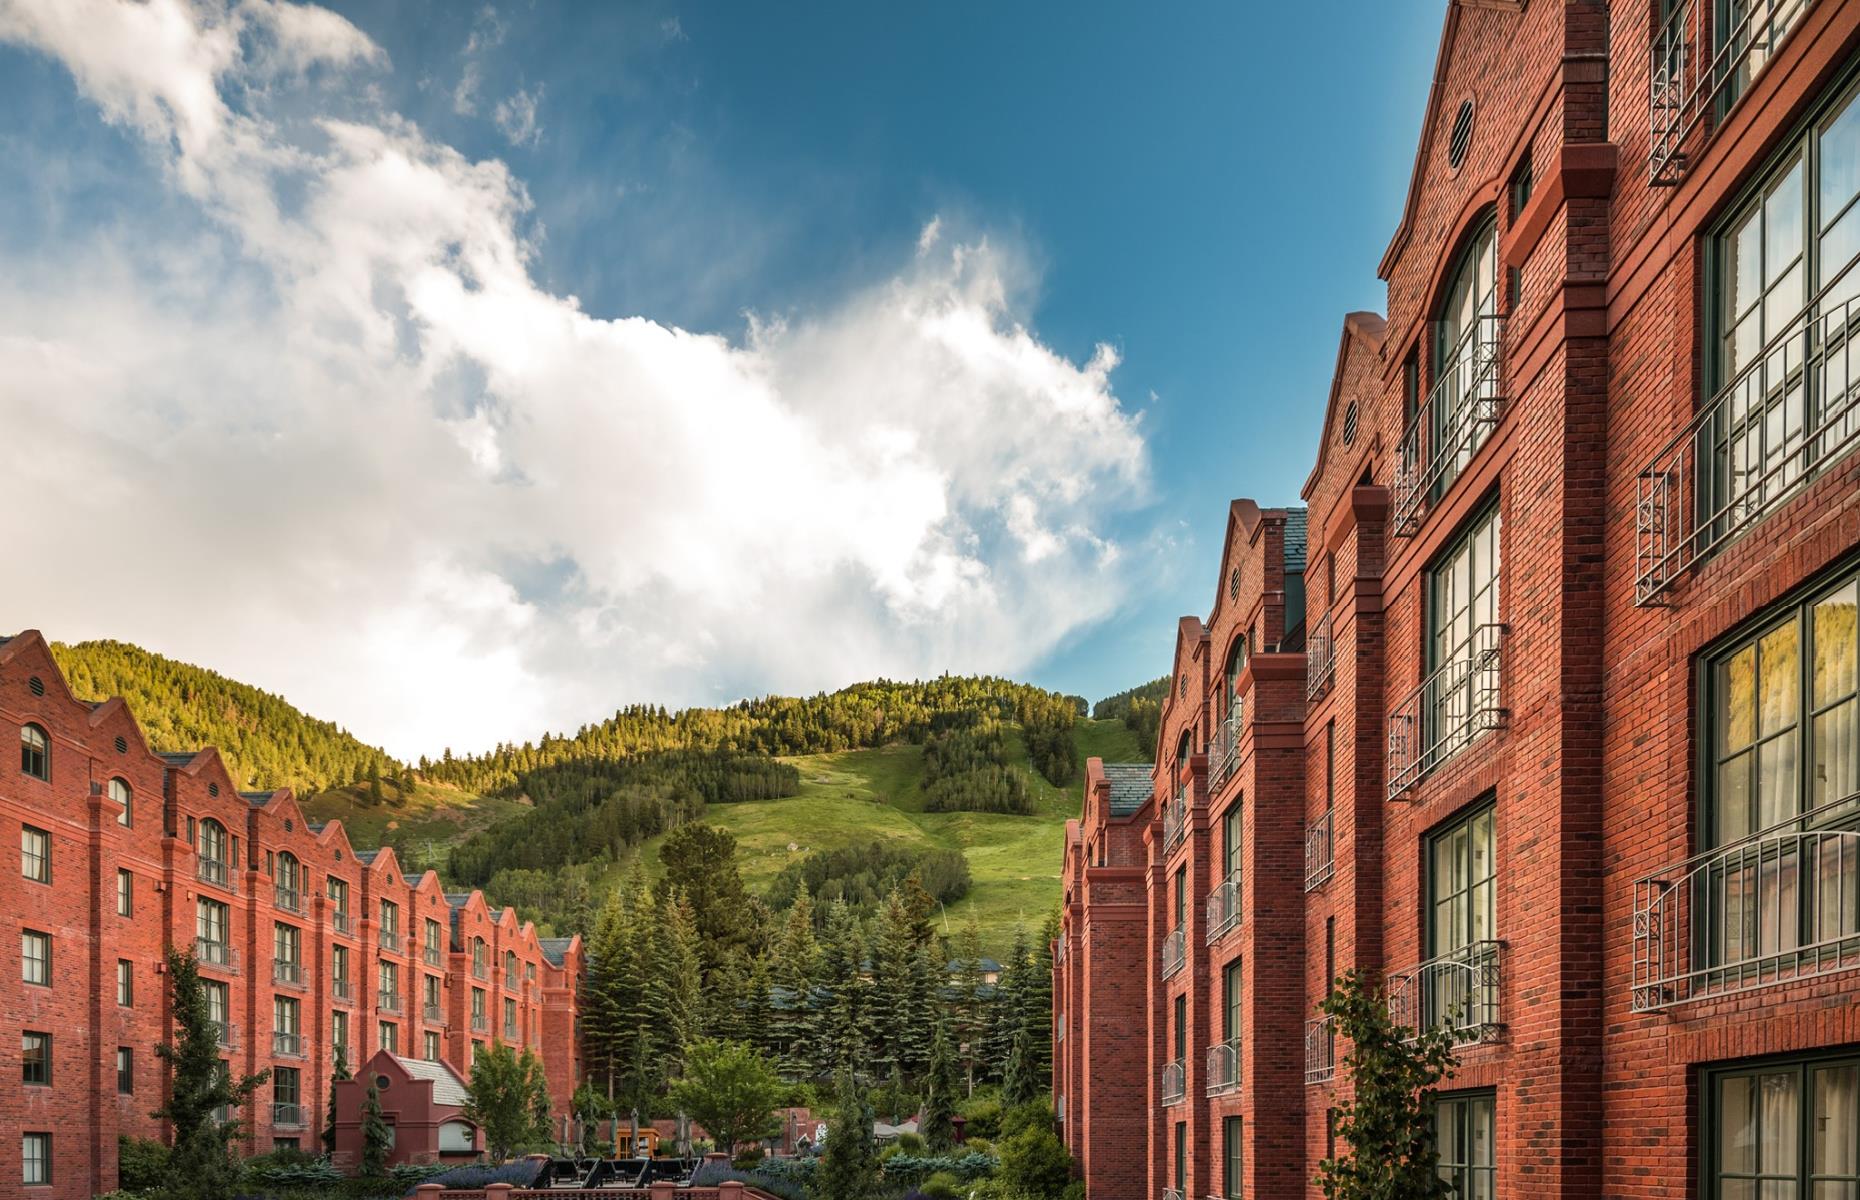 <p>One of the Rockies’ most famous mountain resort towns, Aspen is all about snowy peaks, outdoor adventure and posh hotel experiences. The <a href="https://www.marriott.com/hotels/travel/asexr-the-st-regis-aspen-resort/">St. Regis</a> is one of Aspen’s glitziest, with its mountain views, world-class spa and signature St. Regis rituals like afternoon Champagne sabering ceremonies and evening campfire s’mores. Skiing is the go-to activity here, but there’s plenty of fun in the summer too, with horseback riding, hot-air ballooning and rock climbing on offer.</p>